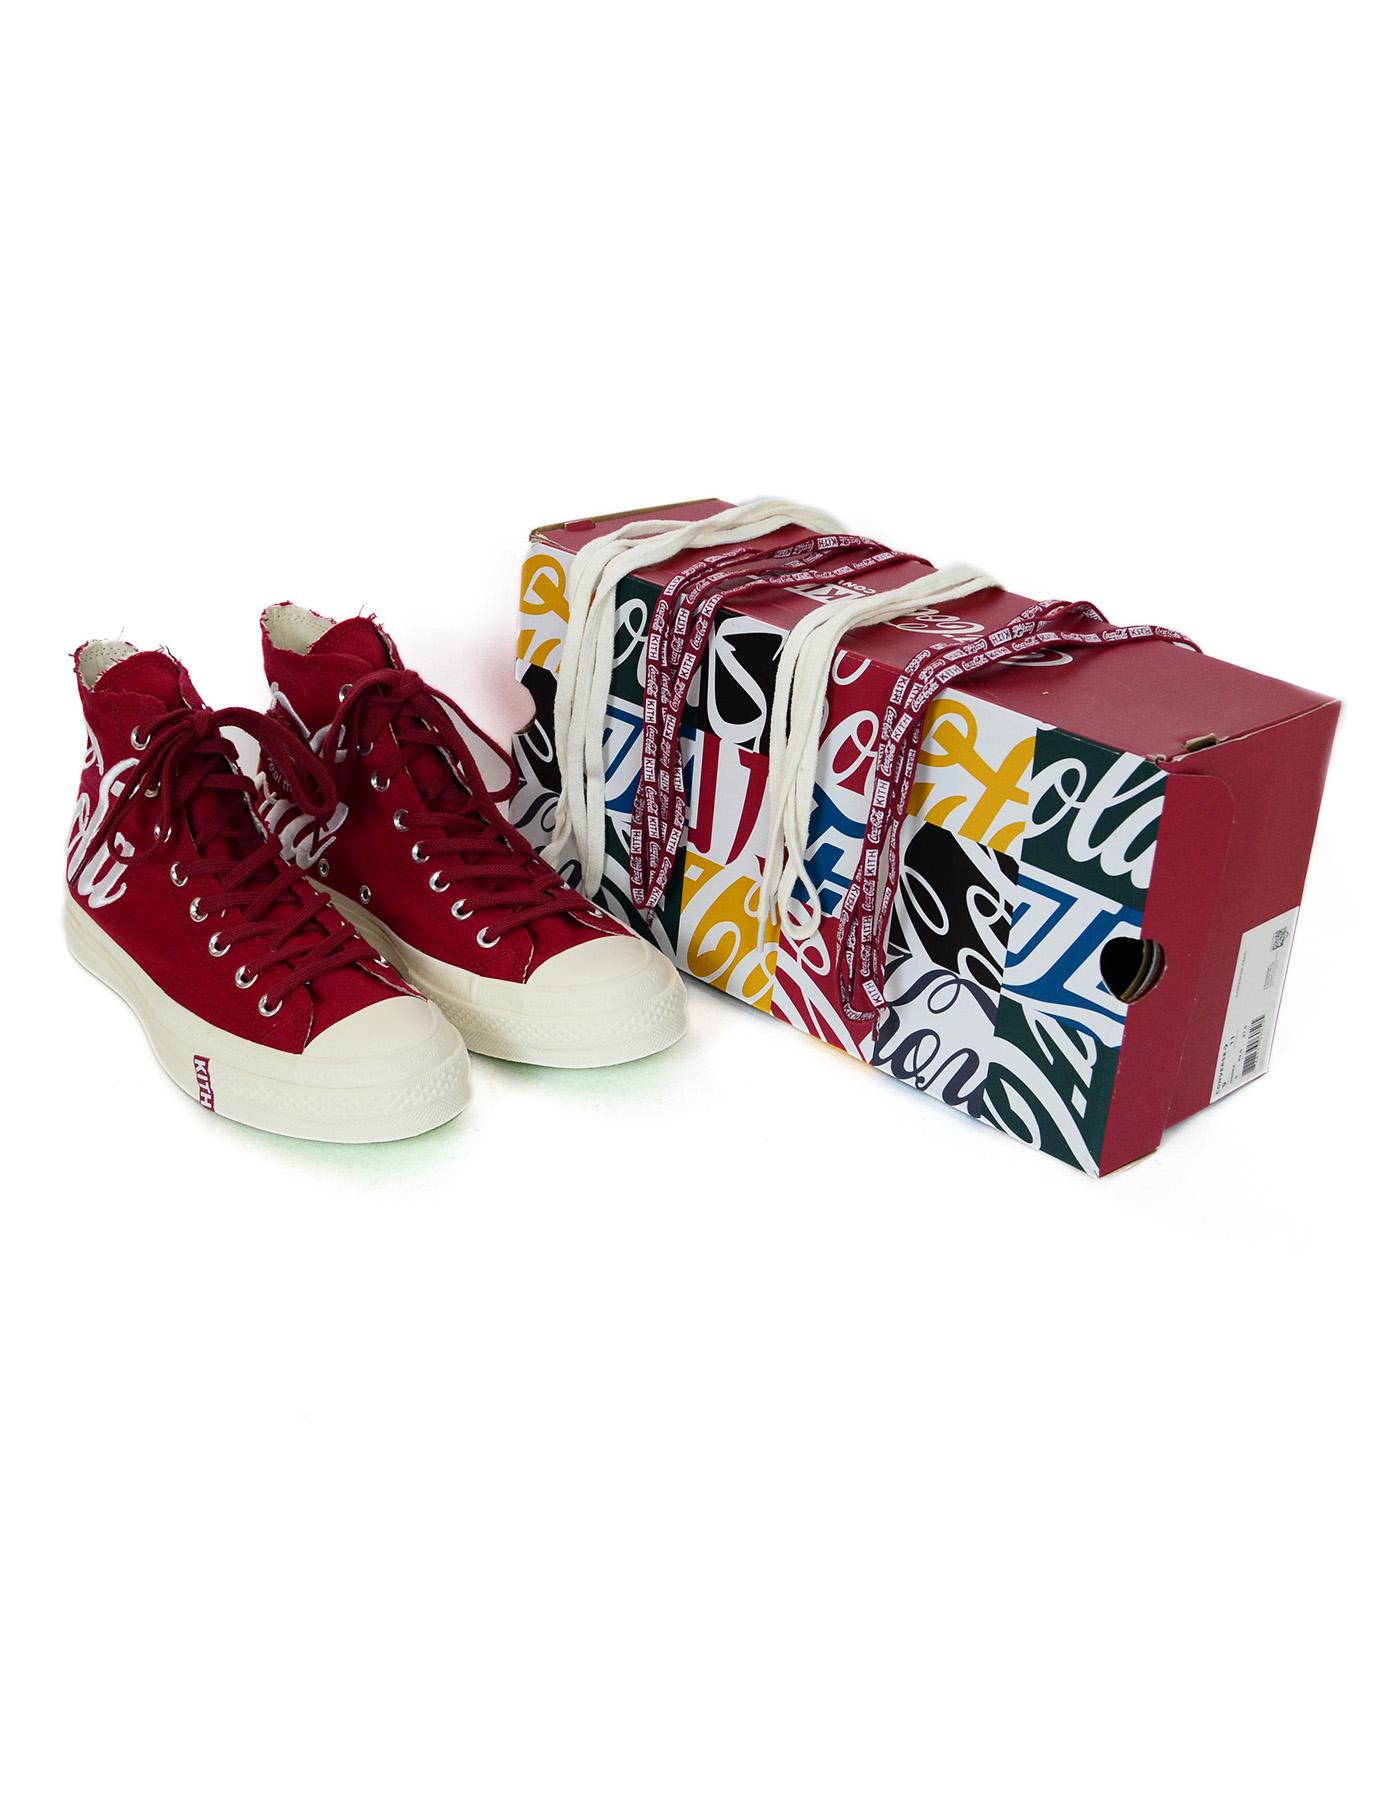 Converse x Kith 2018 NEW Coca-Cola Red High Top Denim Chuck Taylor 70 Sneakers Sz 11 Unisex.
Includes Converse x Kith Shoe Box & A Pair of White Shoe Laces and Coca-Cola x Kith Red Logo Shoe Laces.

Made In: Vietnam
Year of Production: 2018
Color: